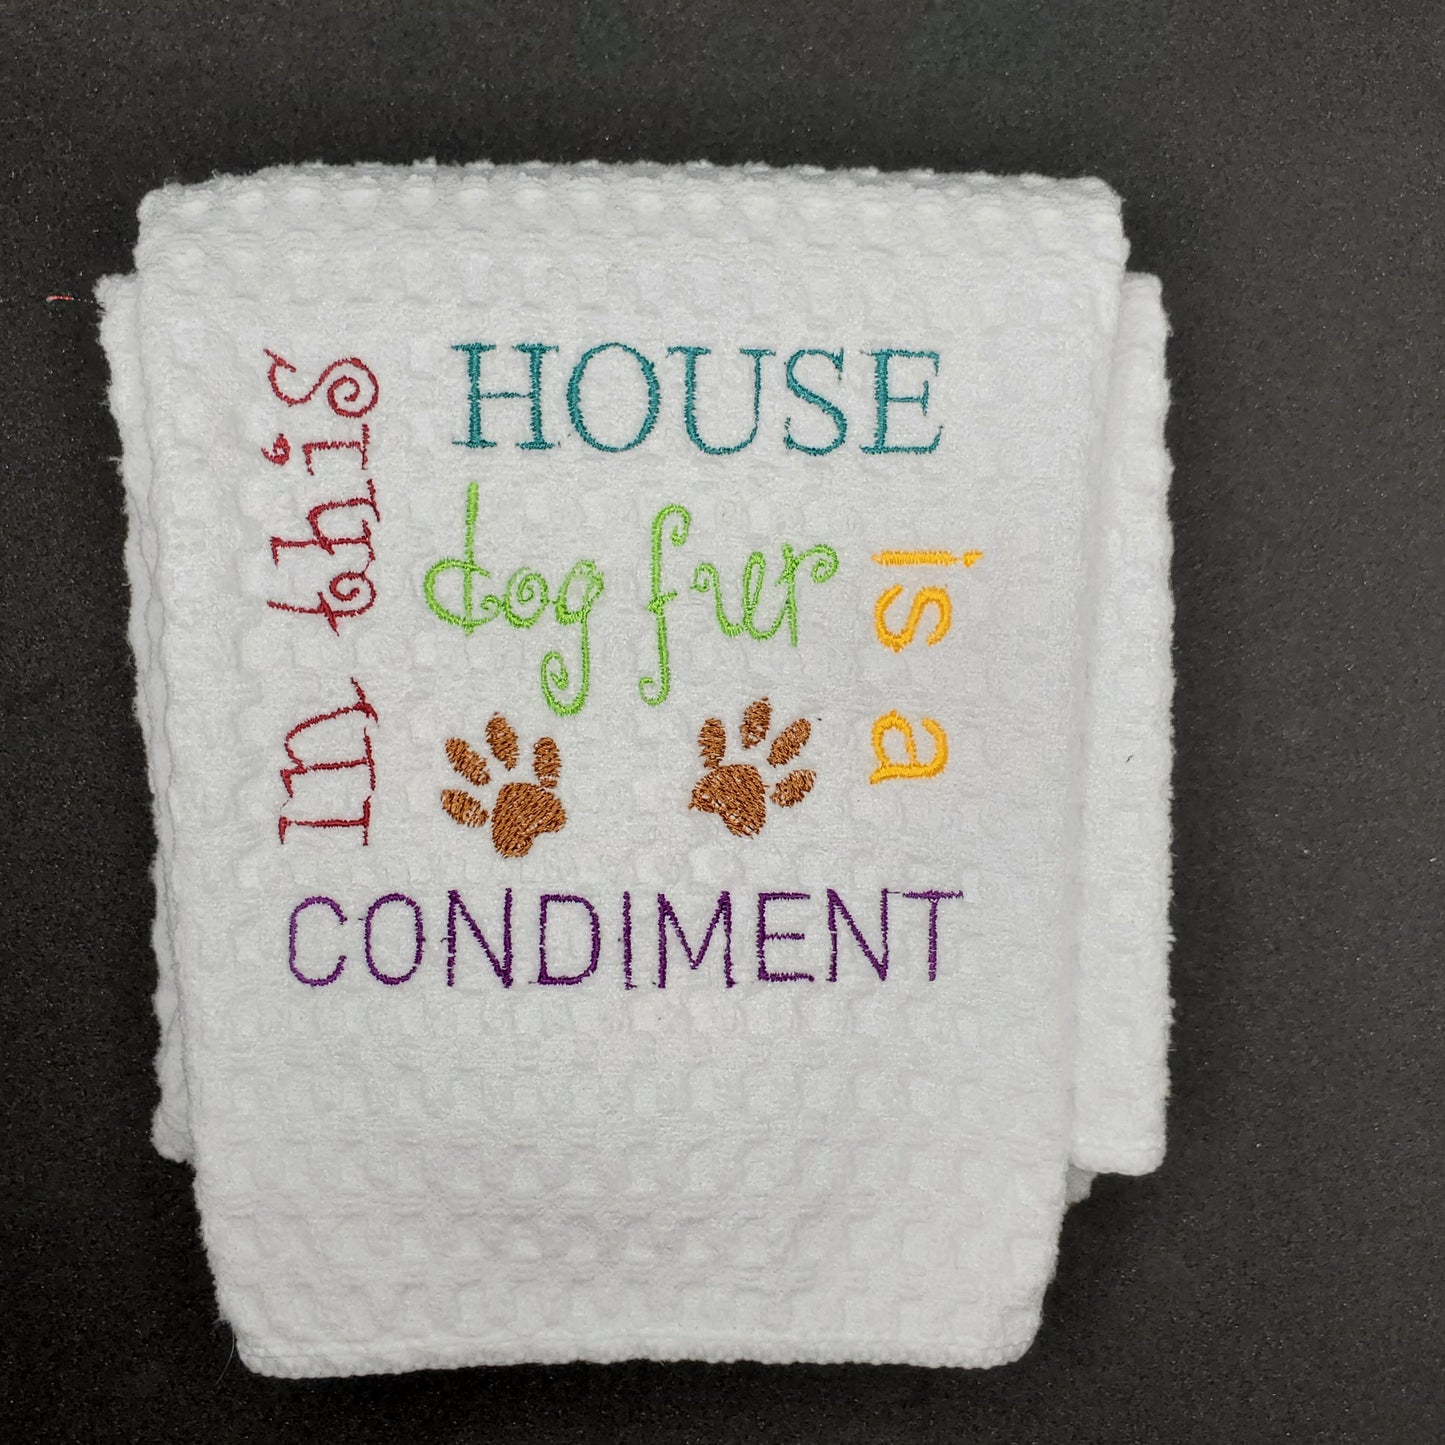 In Our house dog fur is a condiment